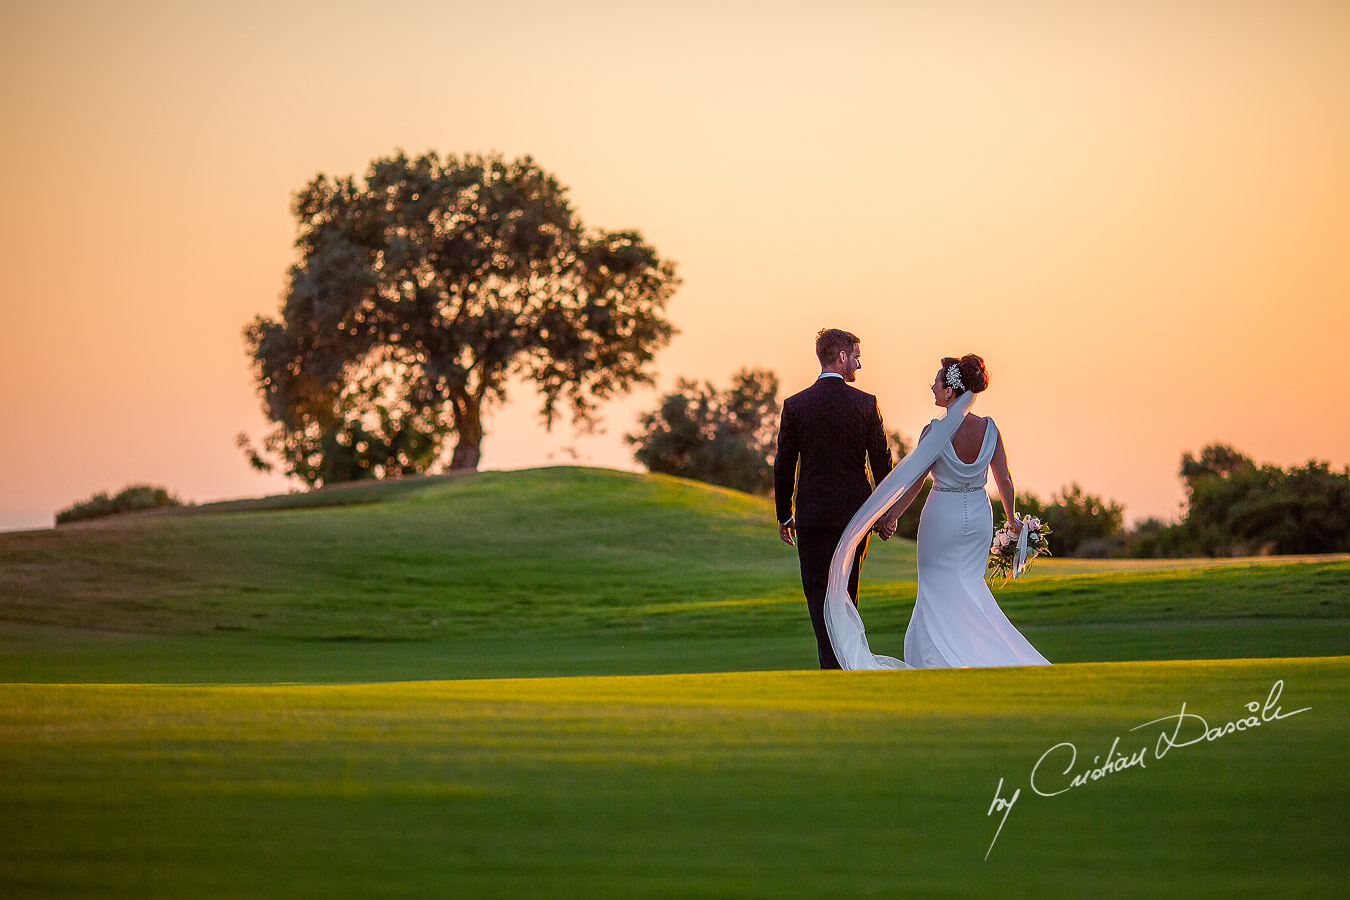 Sunset photo shoot moments captured by Cristian Dascalu during an elegant Aphrodite Hills Wedding in Cyprus.